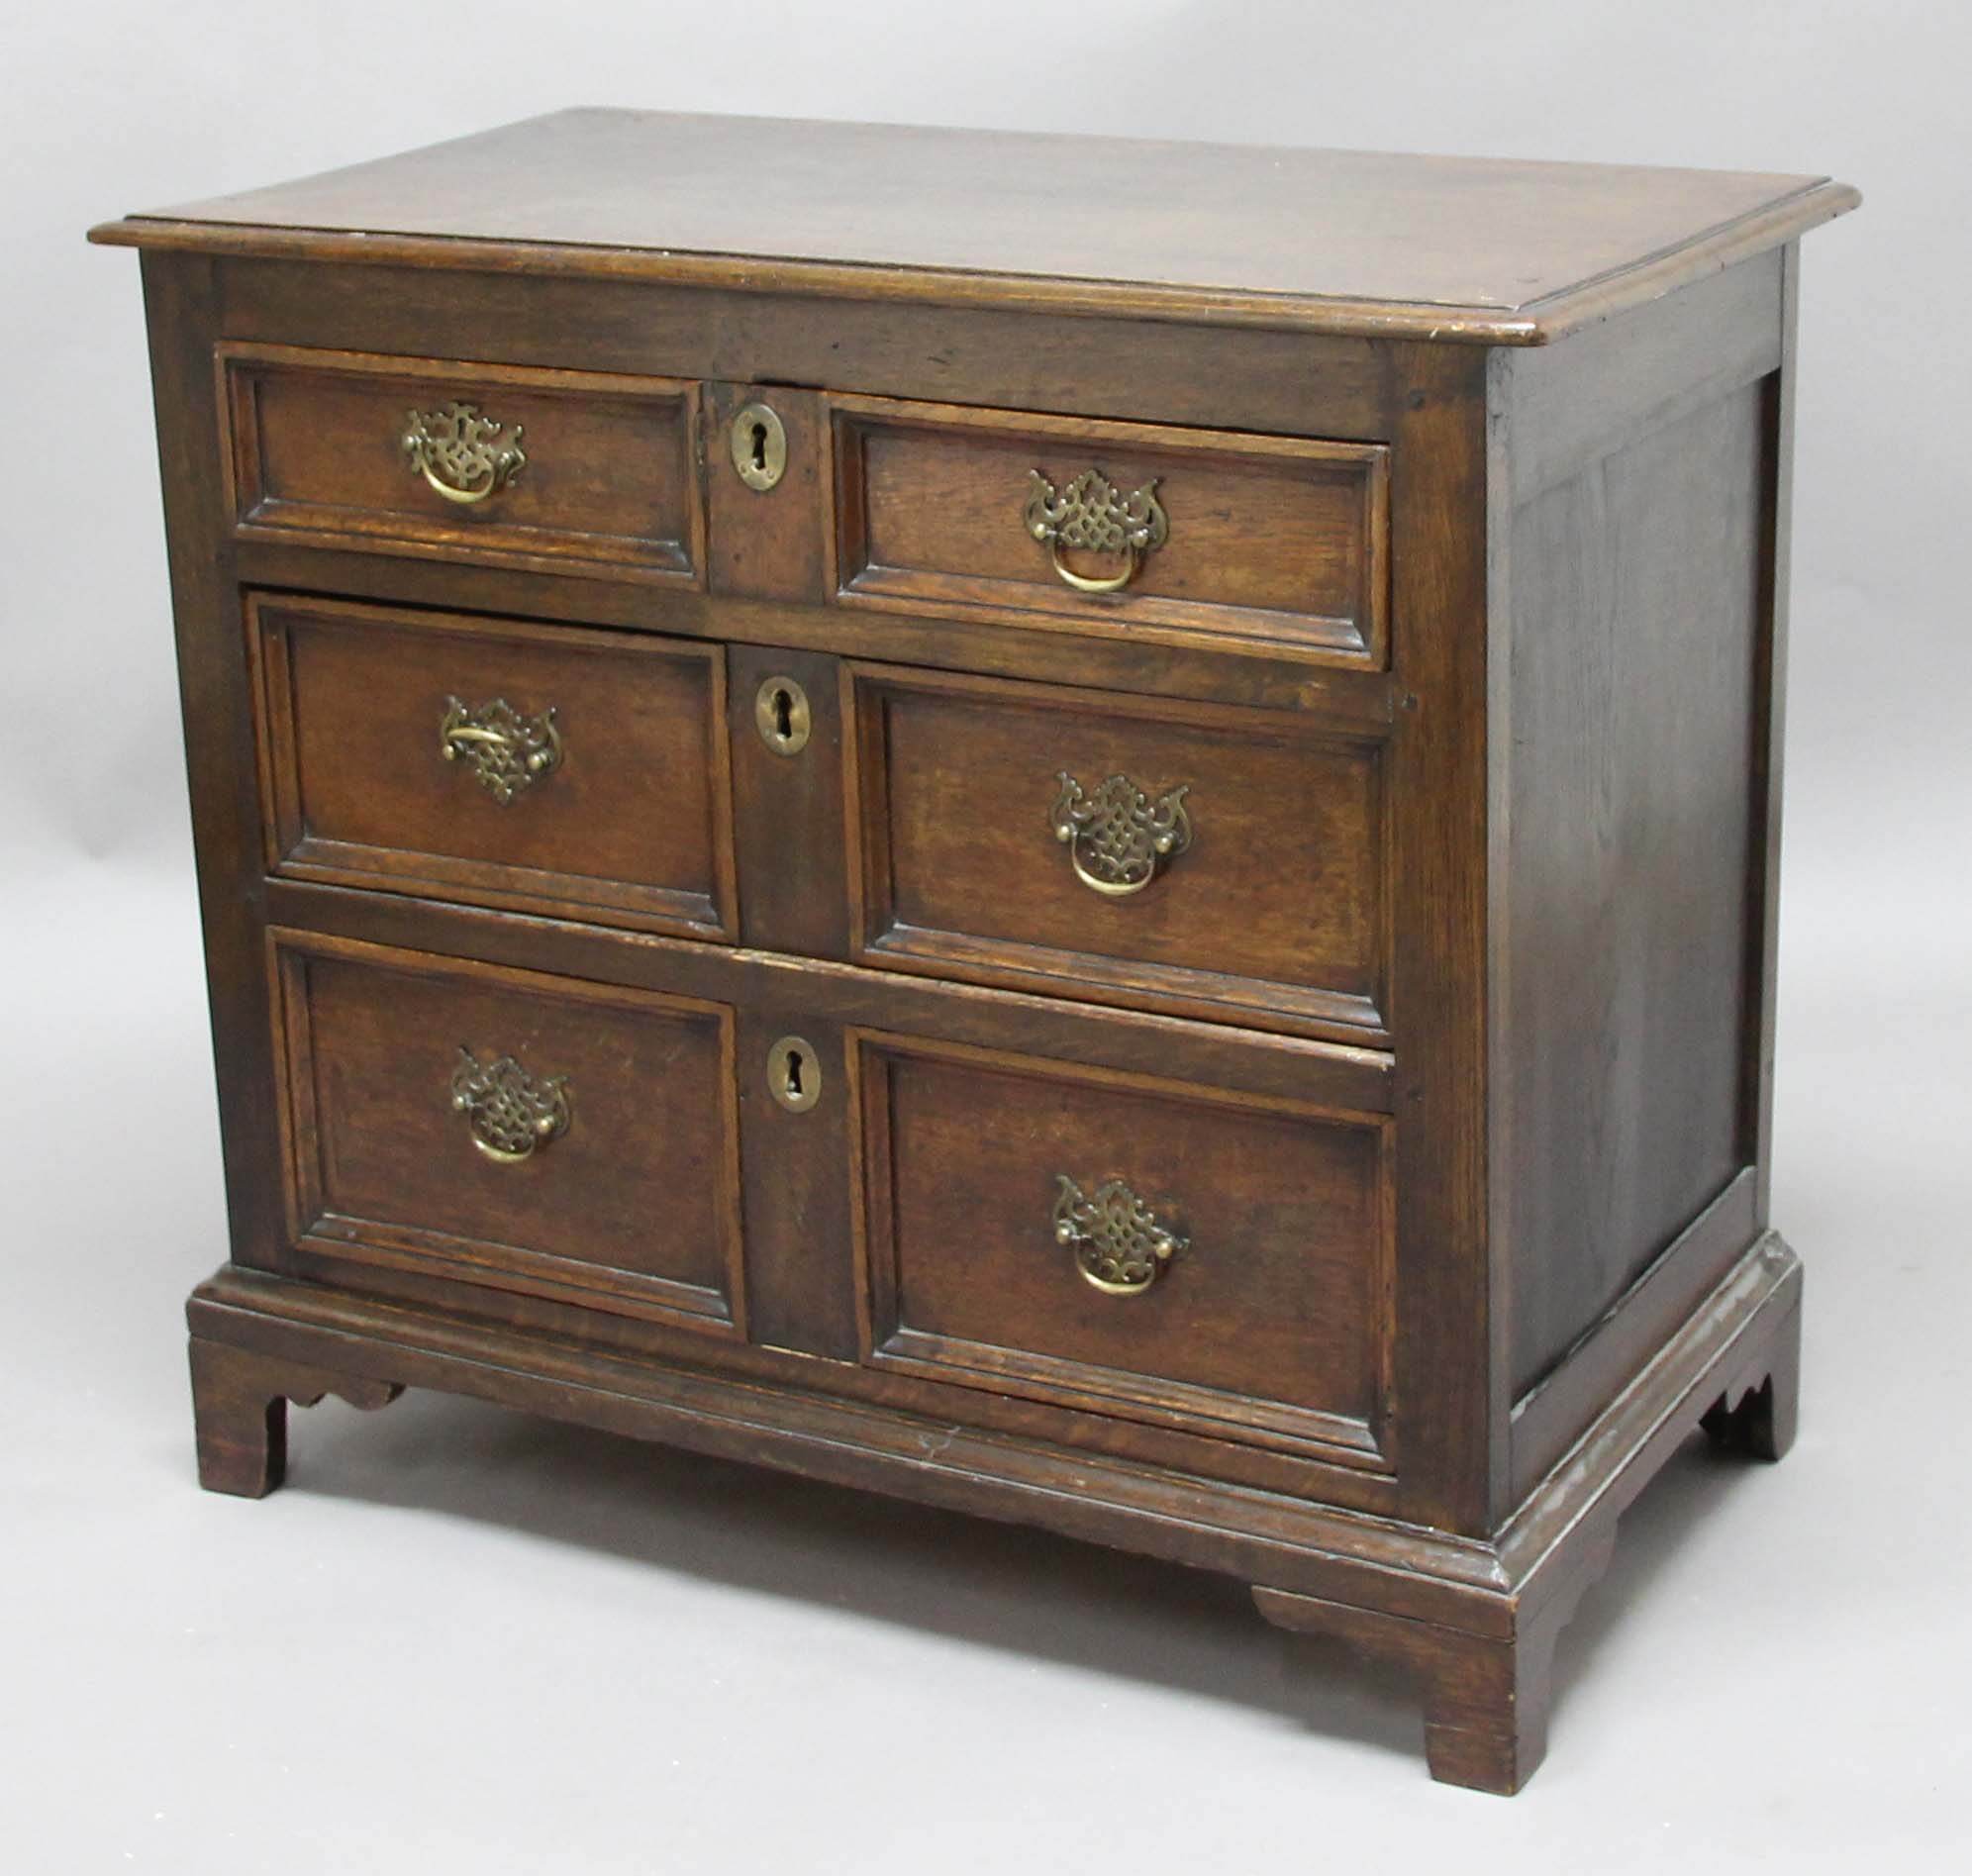 OAK CHEST OF DRAWERS, 18th century, with three graduated drawers and bracket feet, height 86cm,